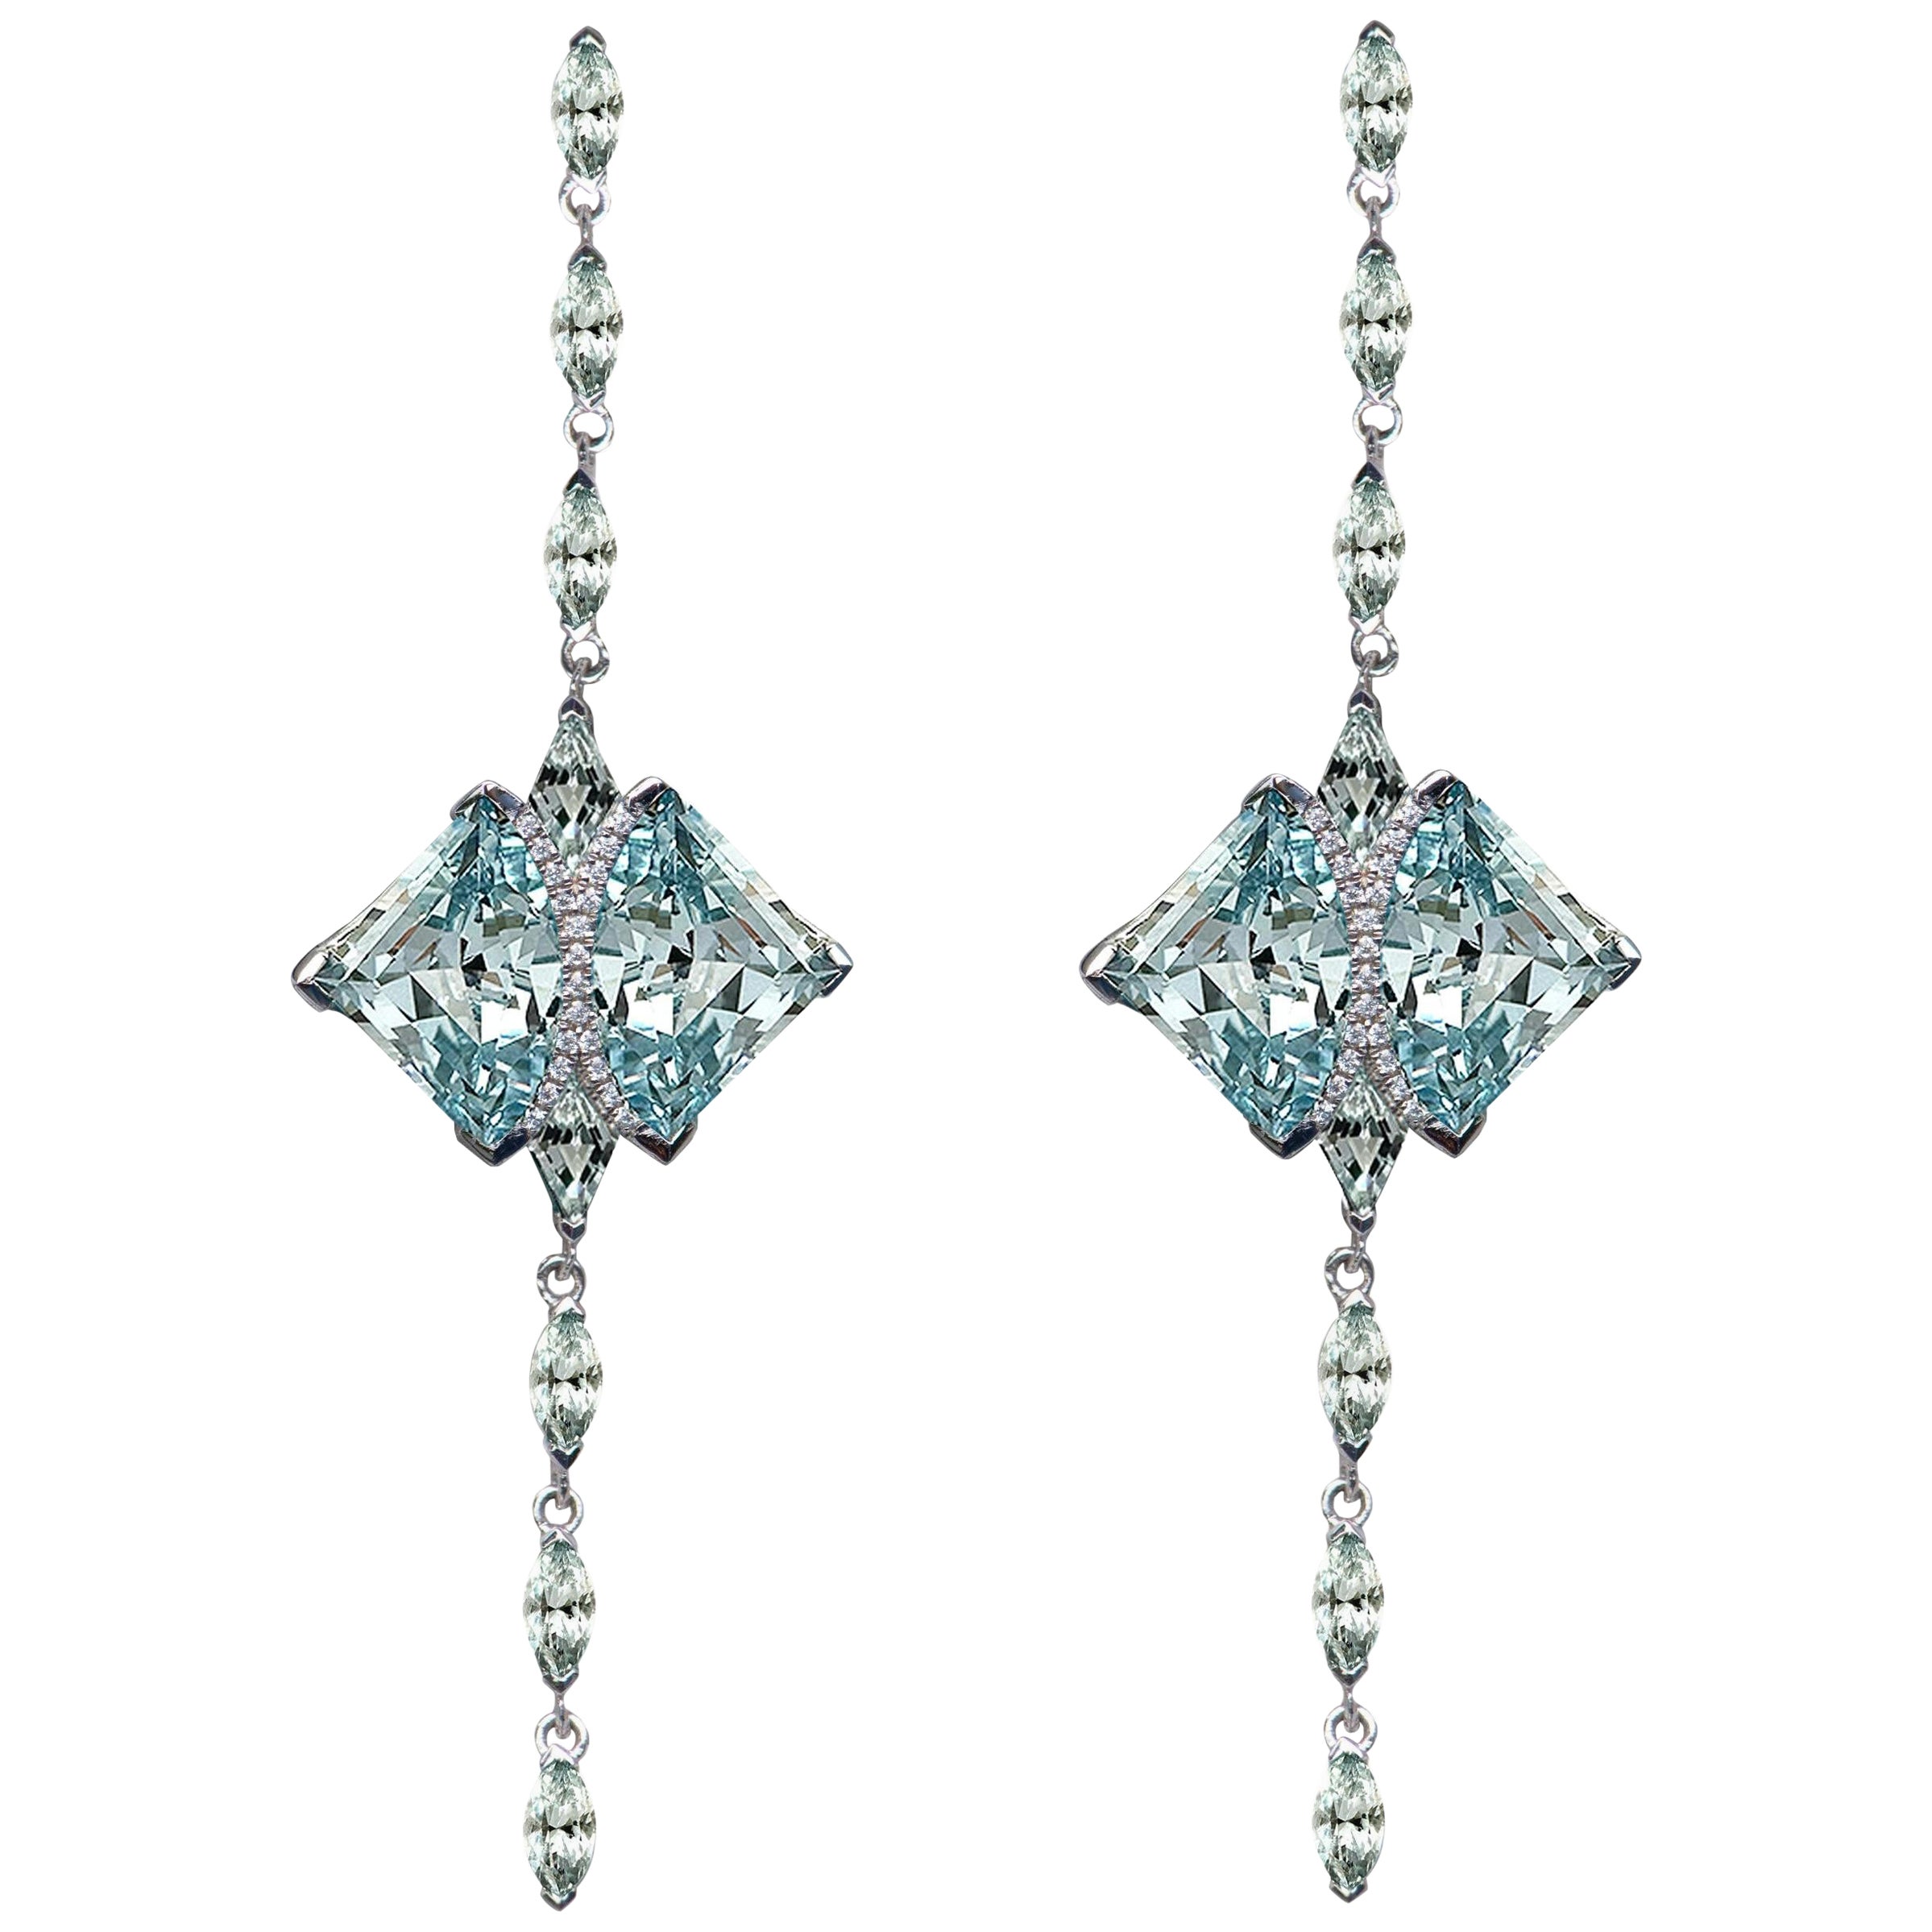 The 20ct Aquamarine Sapphire Eagle Ray Drop Earrings, 14kt White Gold For Sale